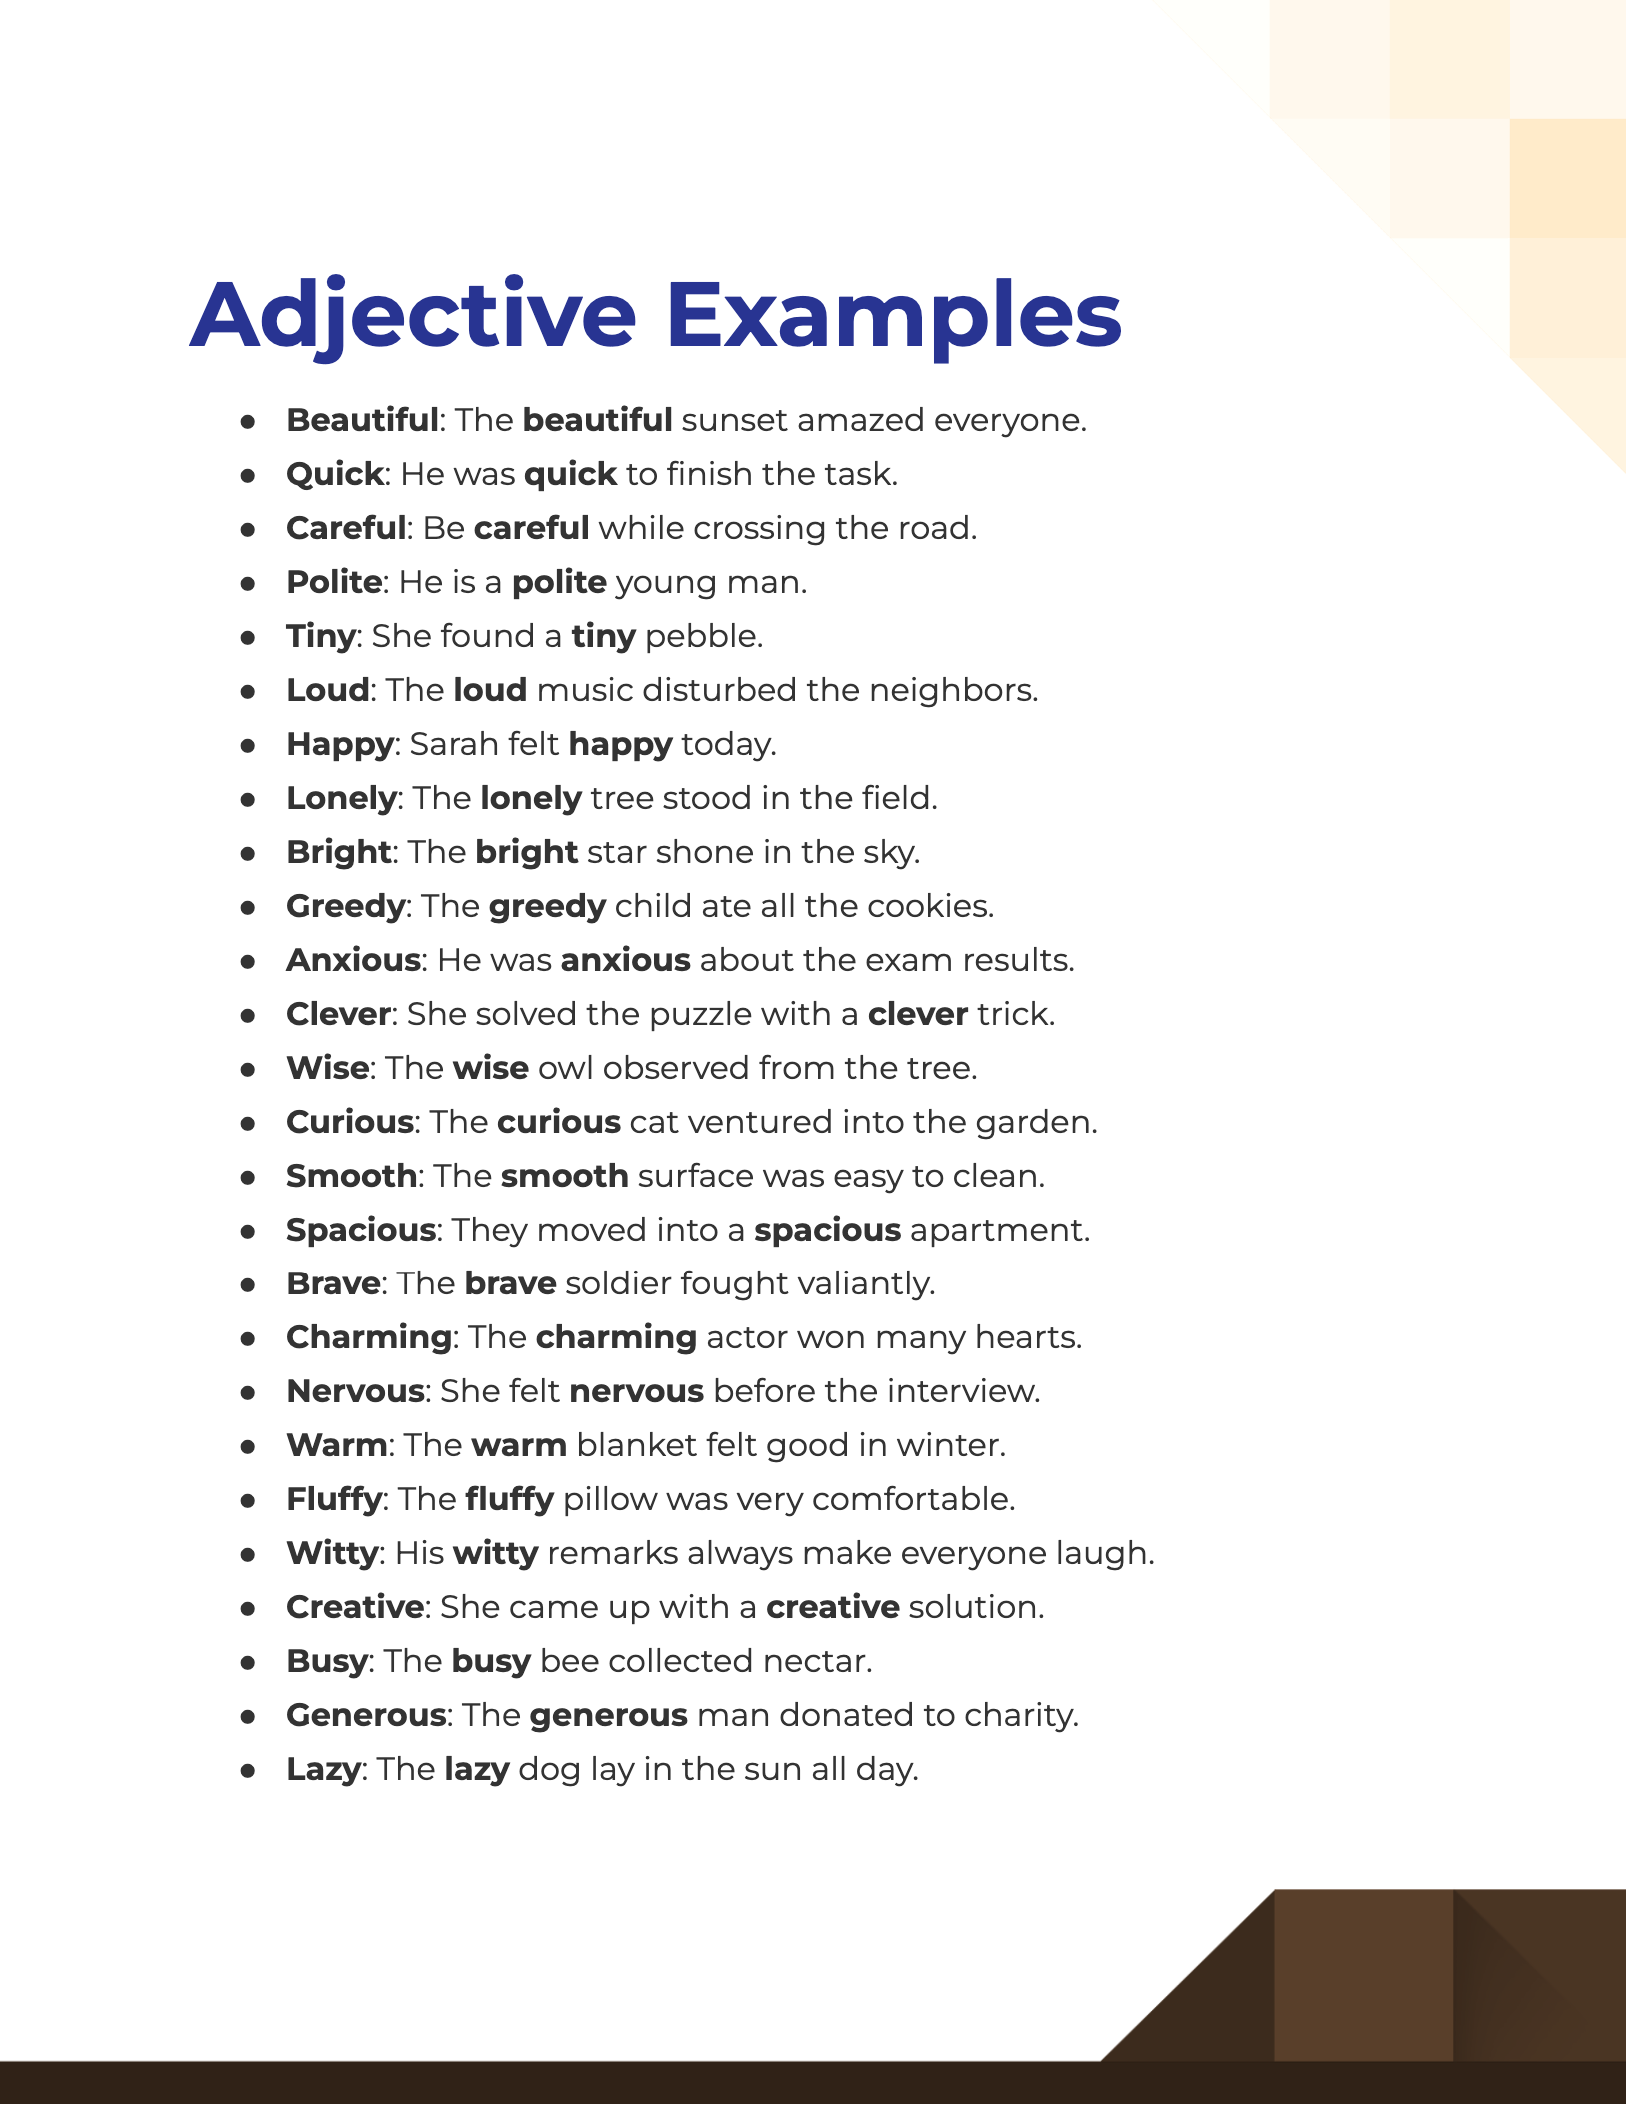 adjective examples1